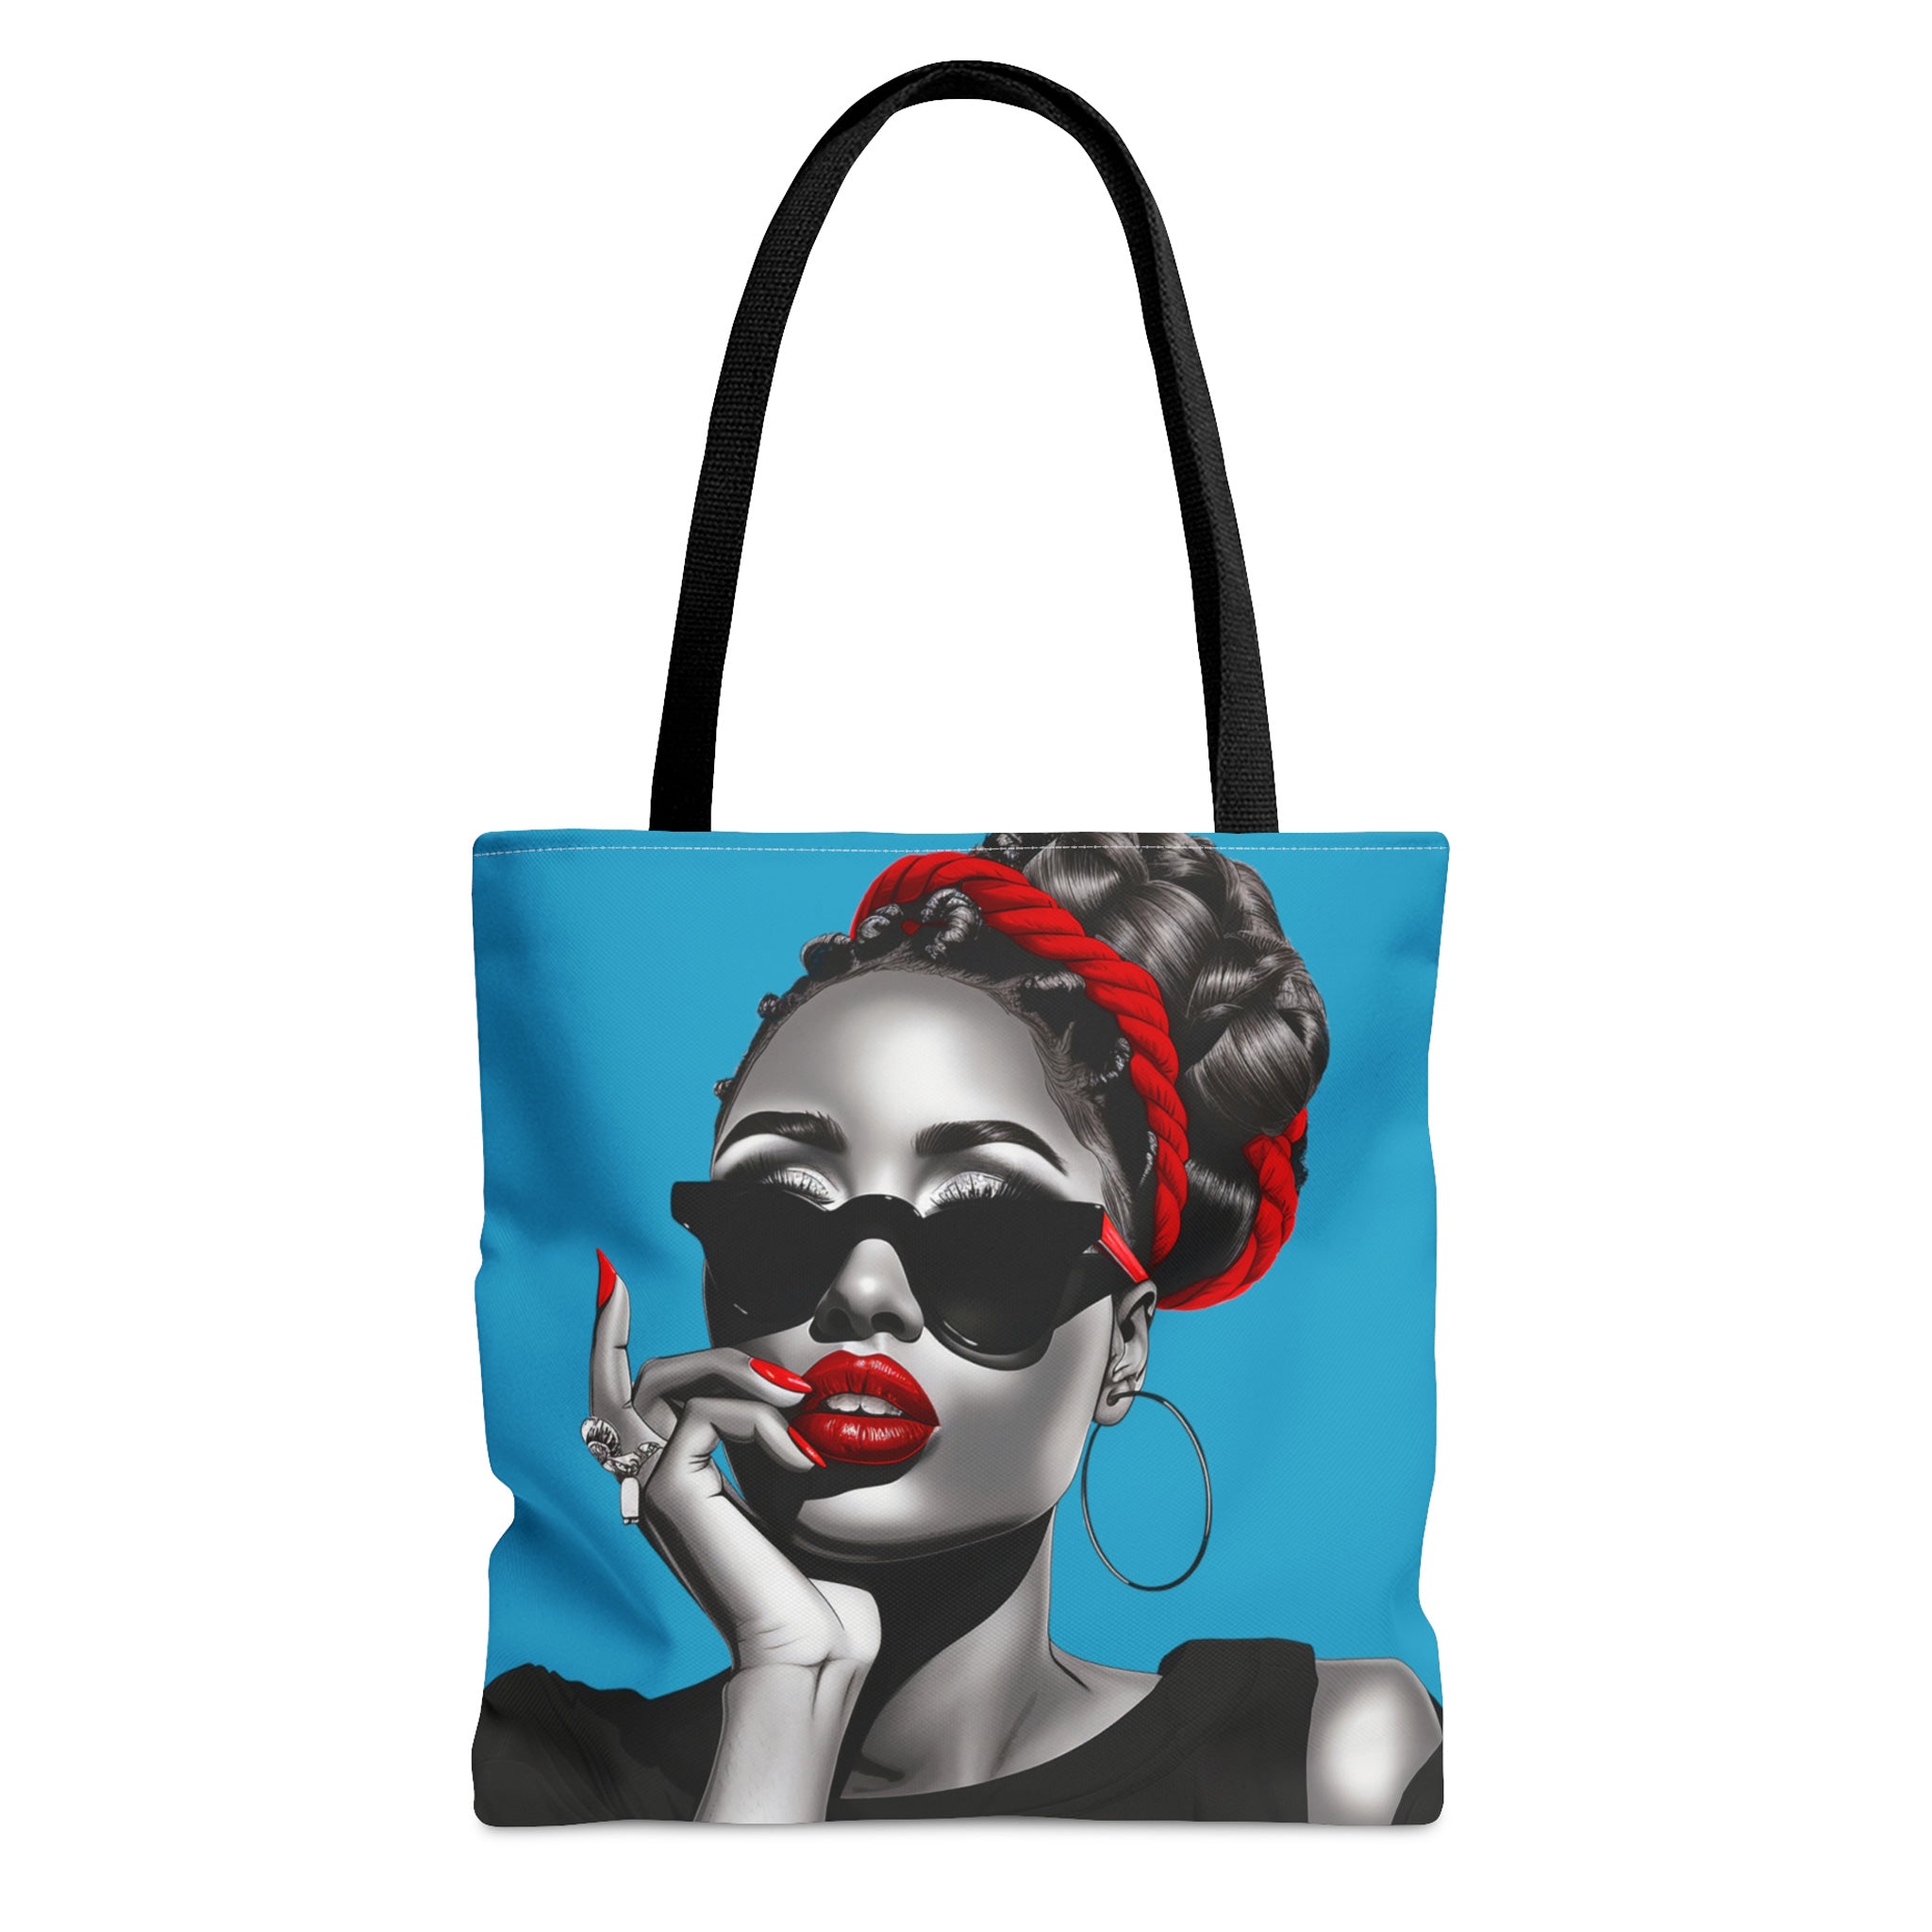 Front view of Black Fashionista Tote Bag.